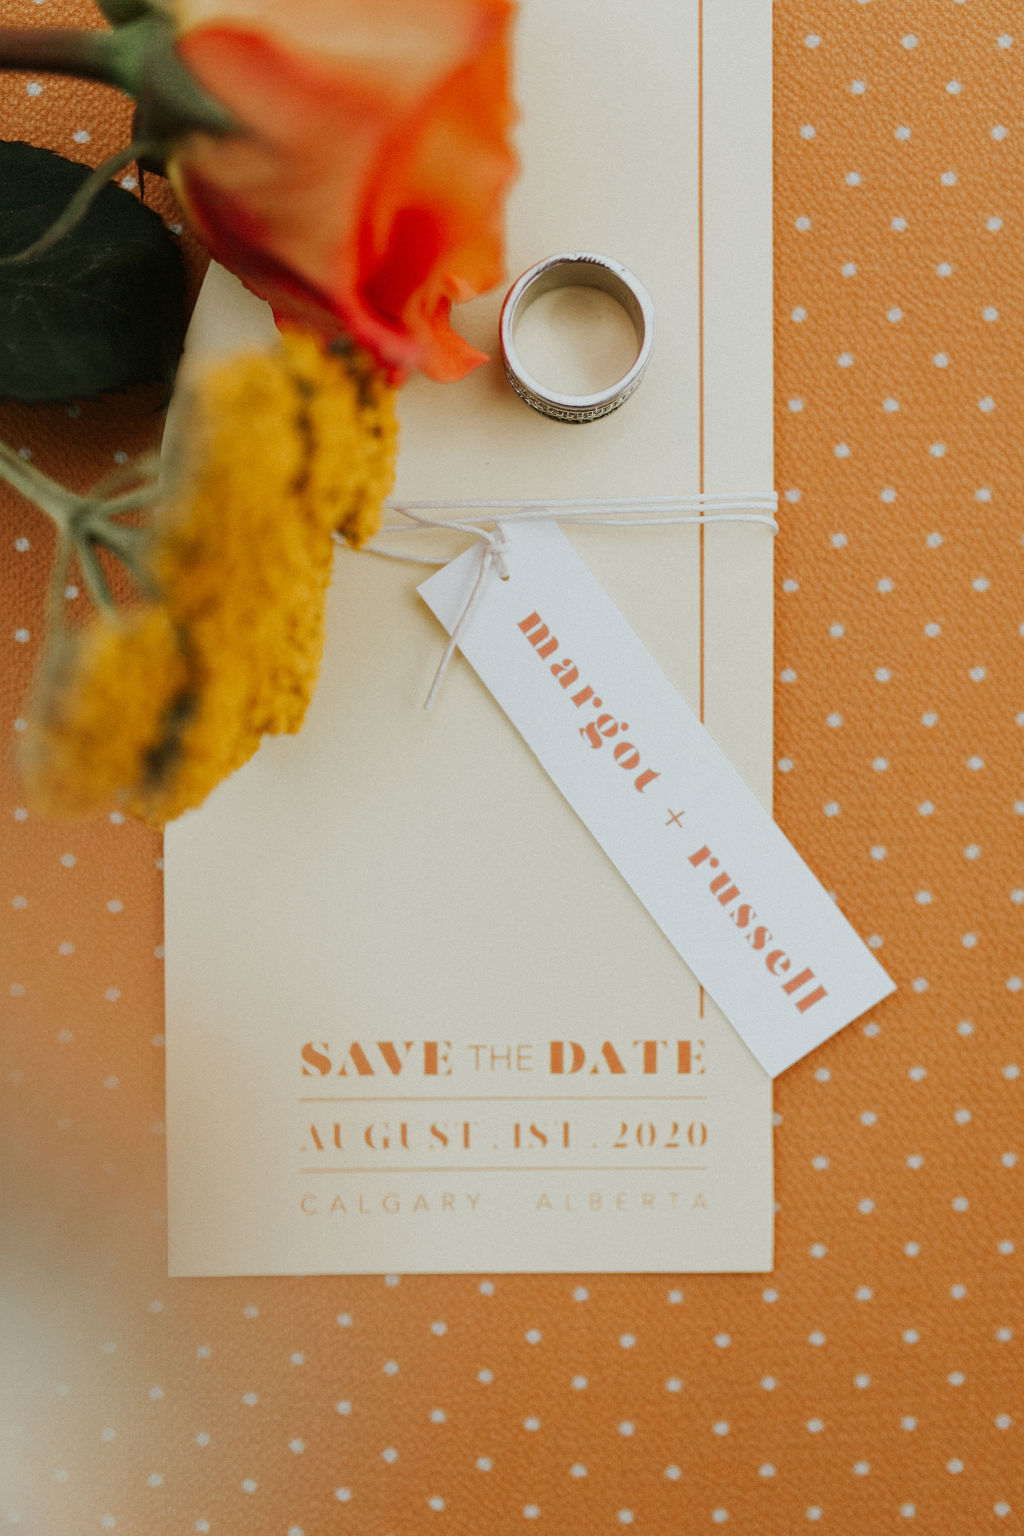 Tangerine wedding inspiration with polka dot wedding stationery and save the dates